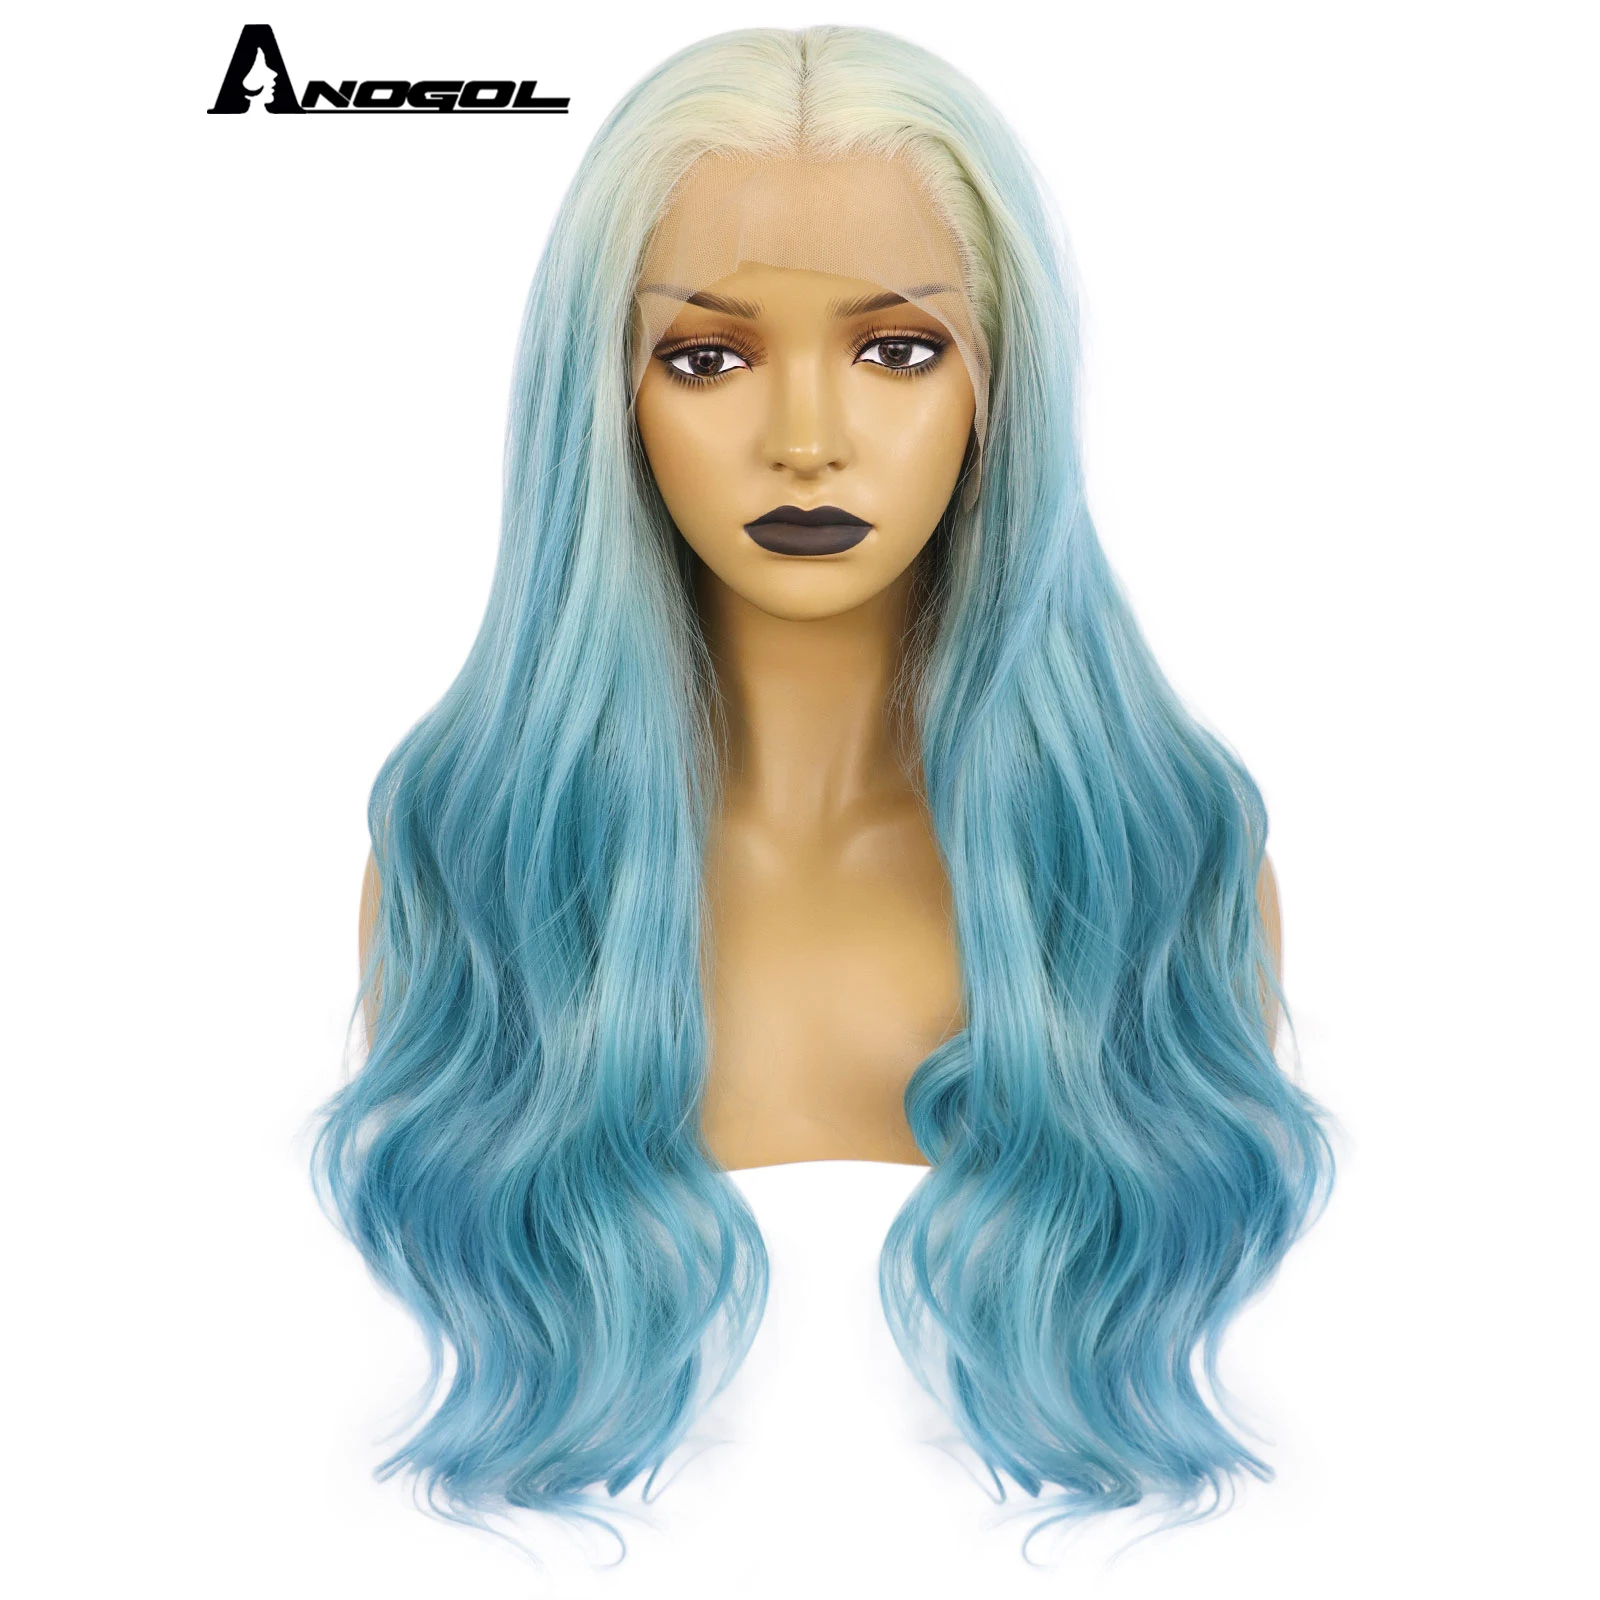 

Anogol Synthetic Wigs 28 Inches 13*4 Lace Front Wigs Light Blue White Long Wave Ombre Blonde Natural Wavy Wig for Women